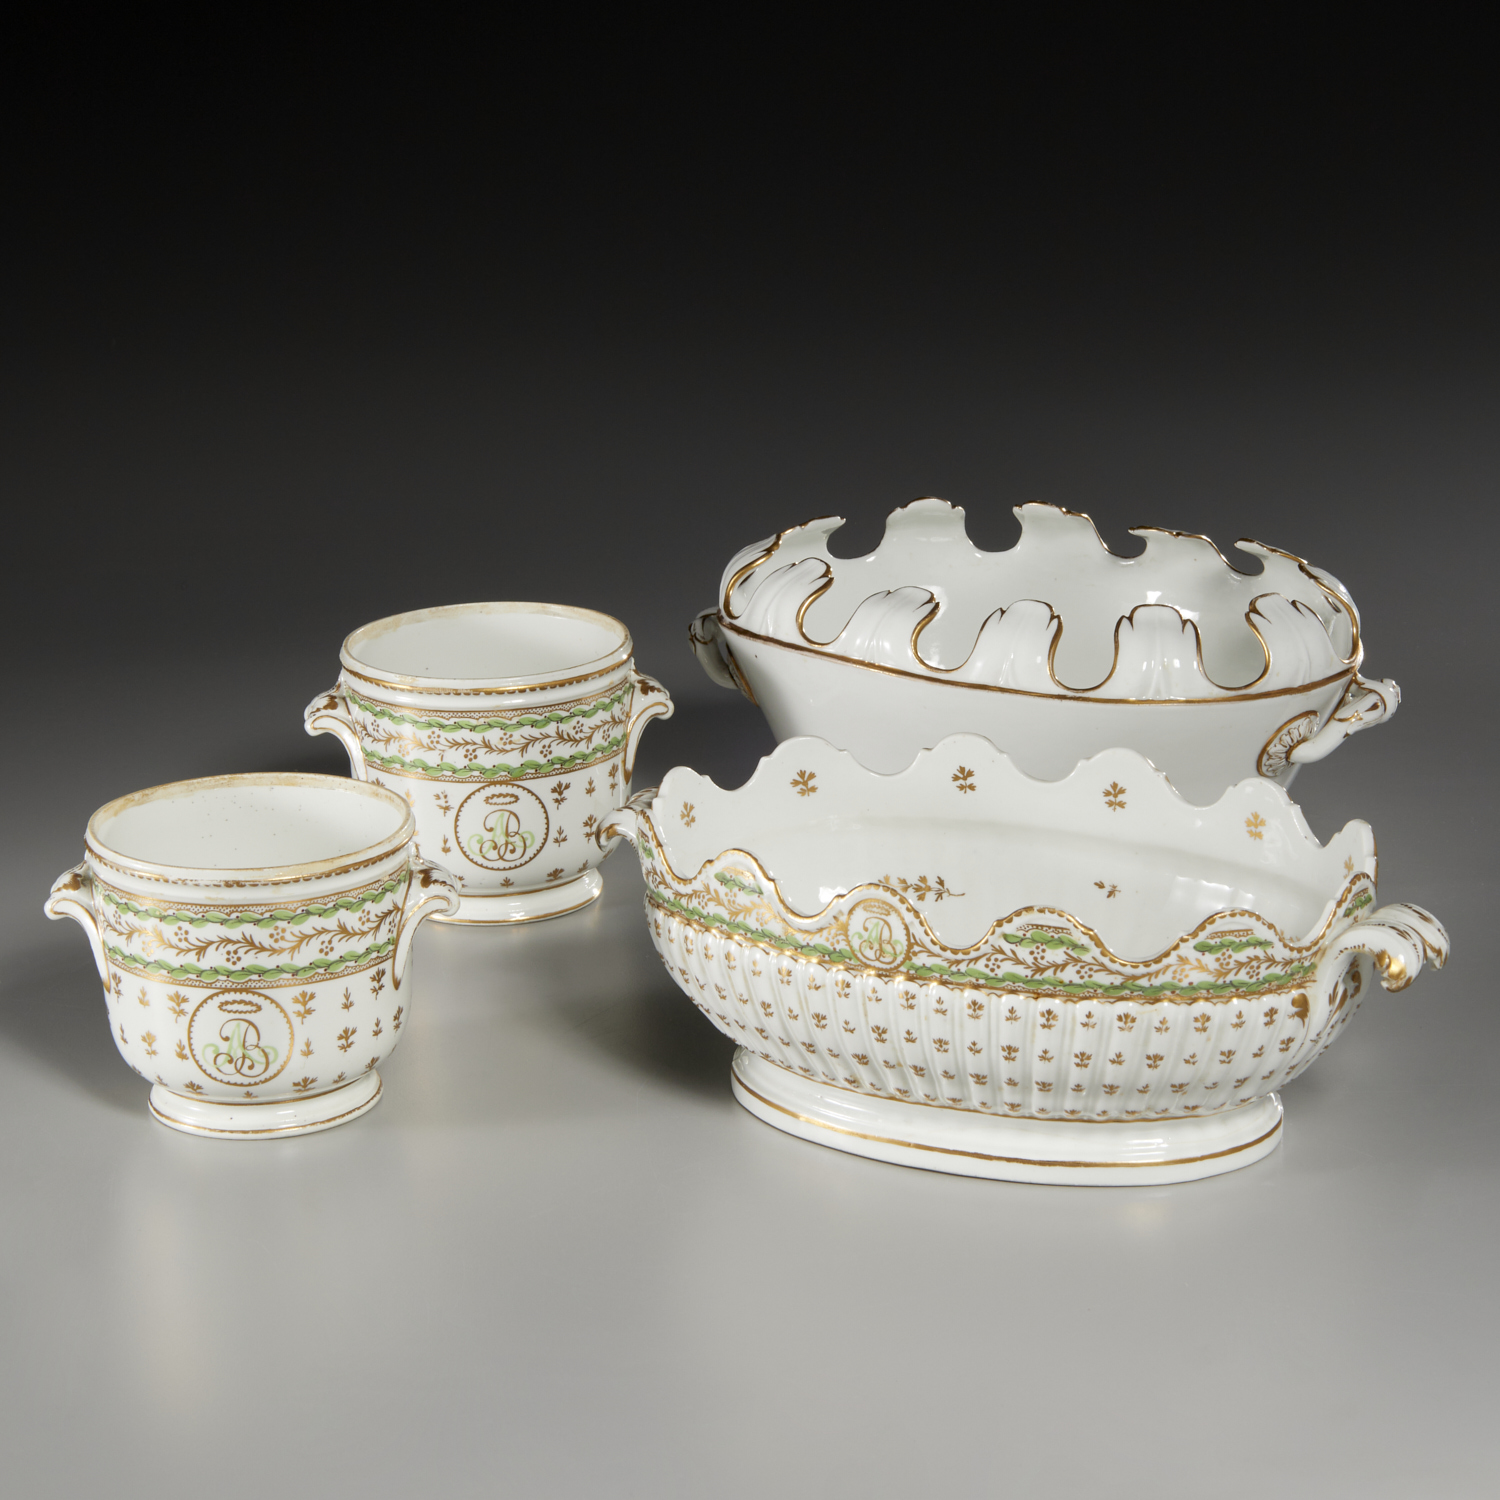 GROUP BRINGEON AND LEBOEUF PORCELAIN